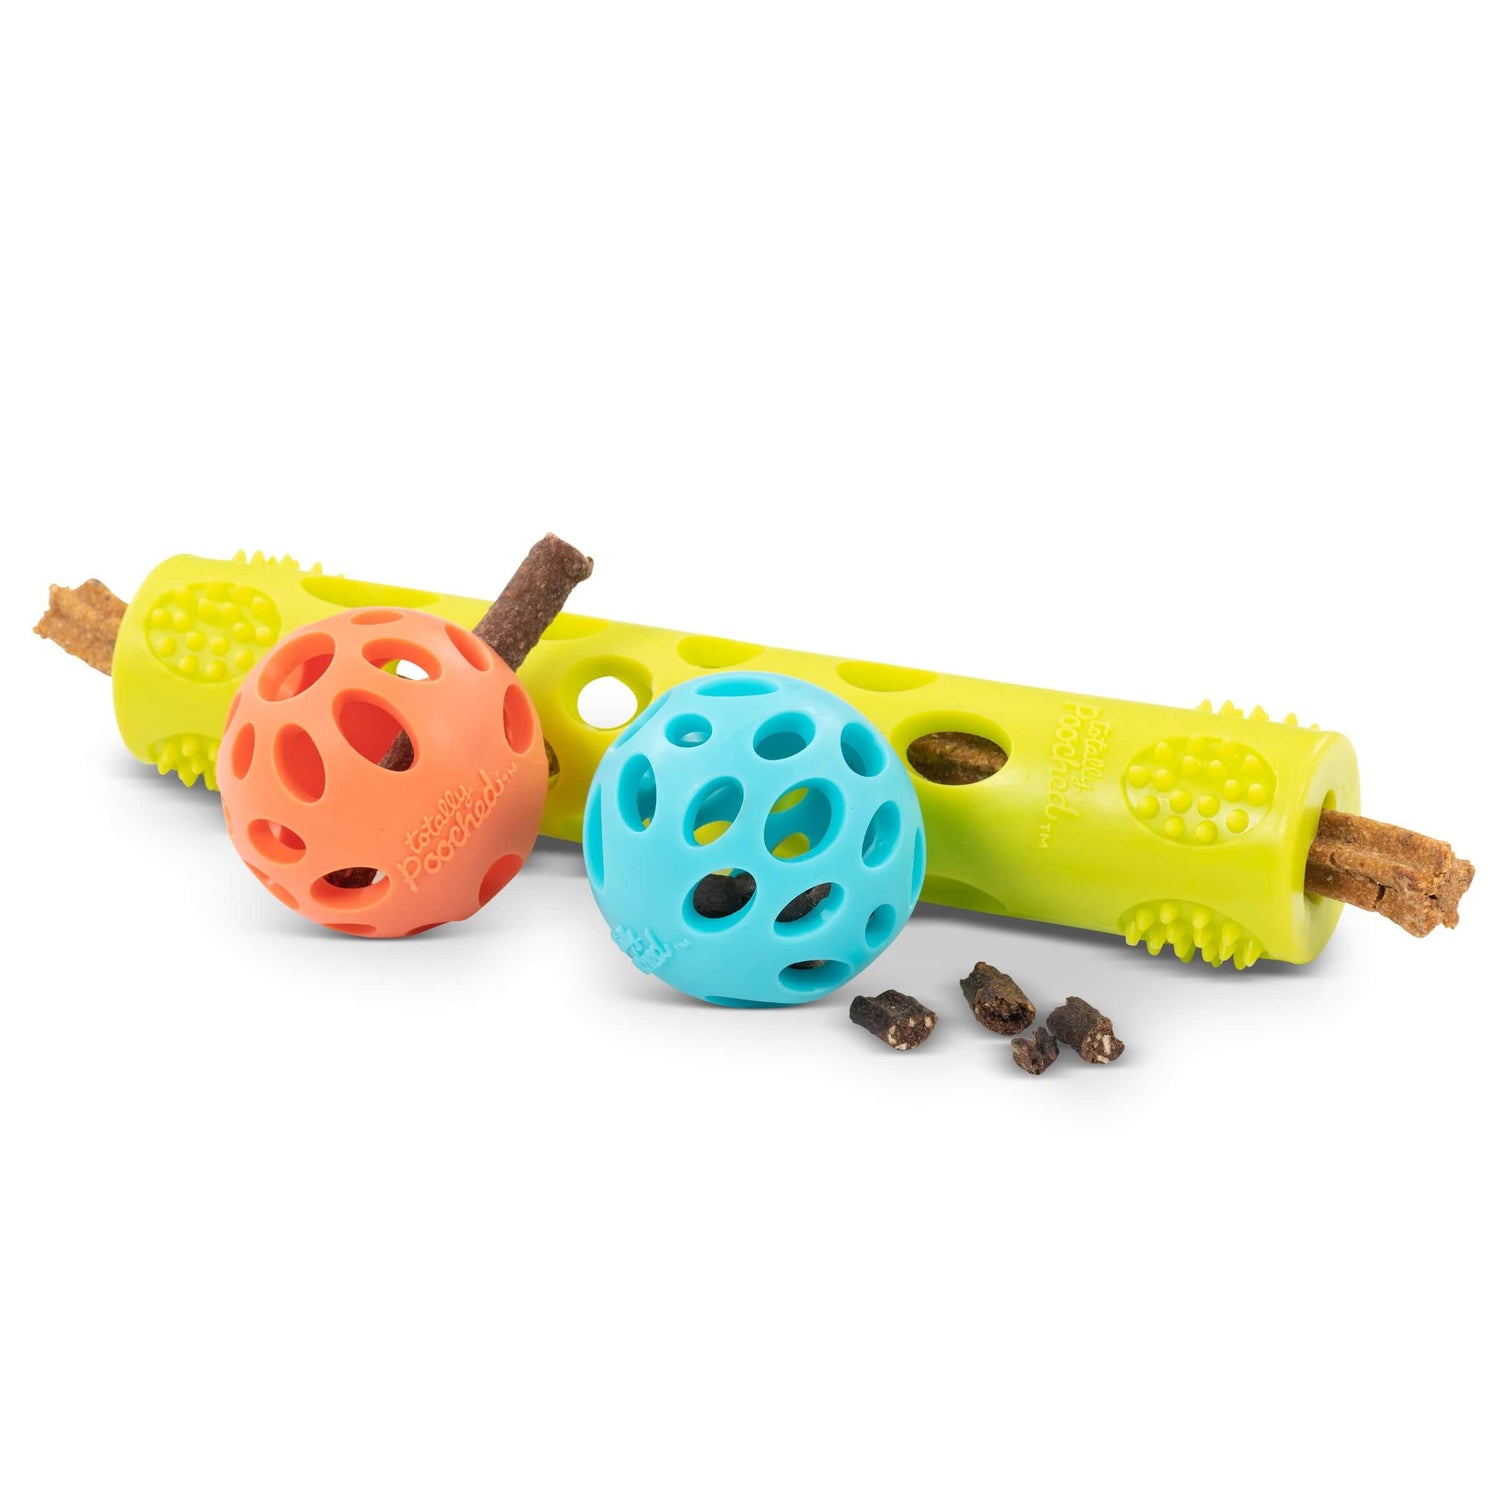 All dog toys can be stuffed with treats for more interactive play. 